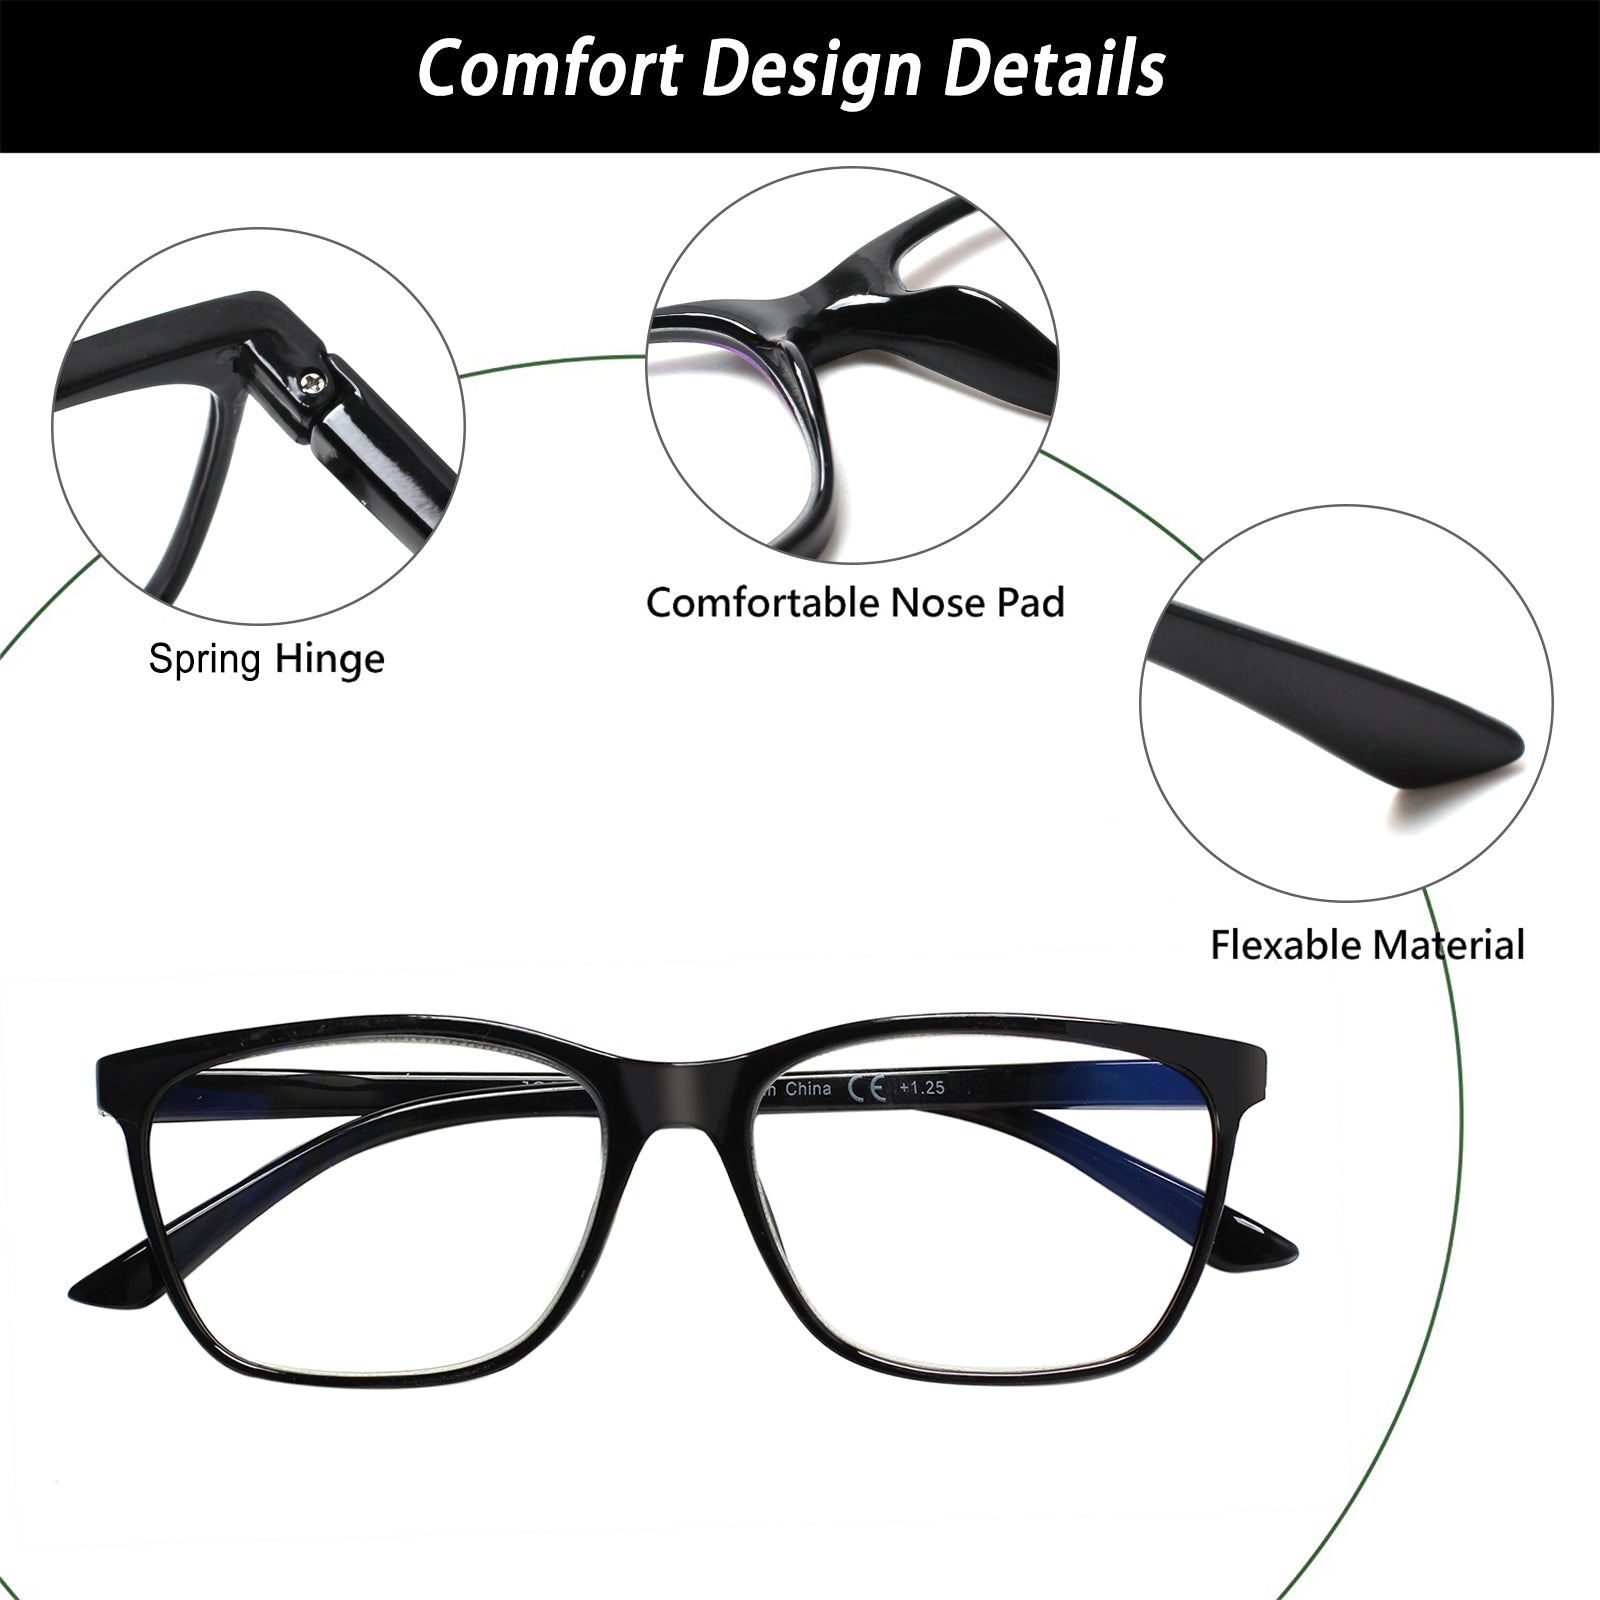 6 Pack Square Reading Glasses Blue Light Blocking Computer Readers 246